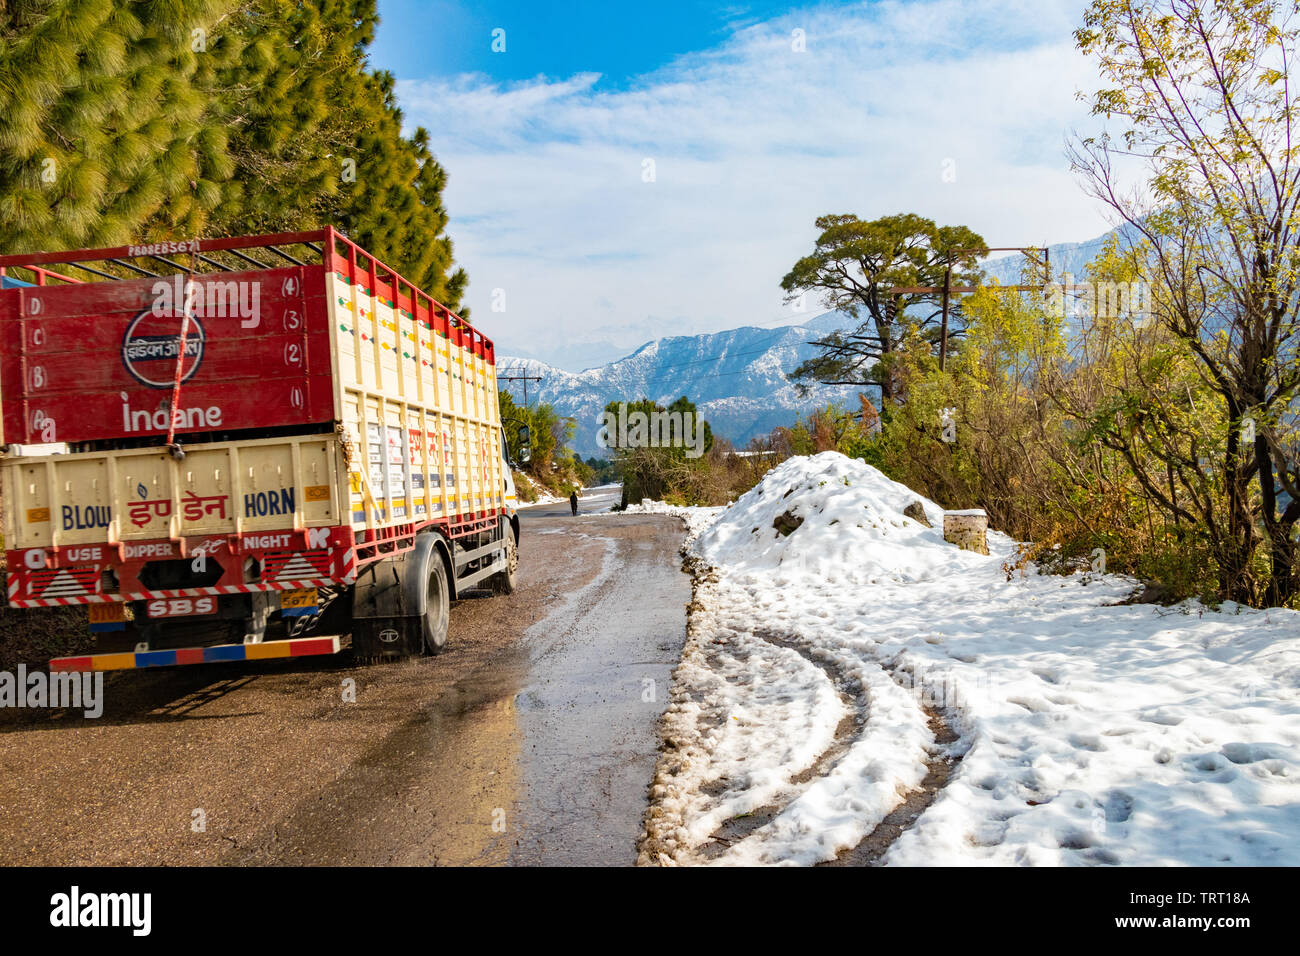 Banikhet, Dalhousie, Himachal Pradesh, India - January 2019. After consequences of heavy snowfall, Indian oil LPG truck on the road. Stock Photo